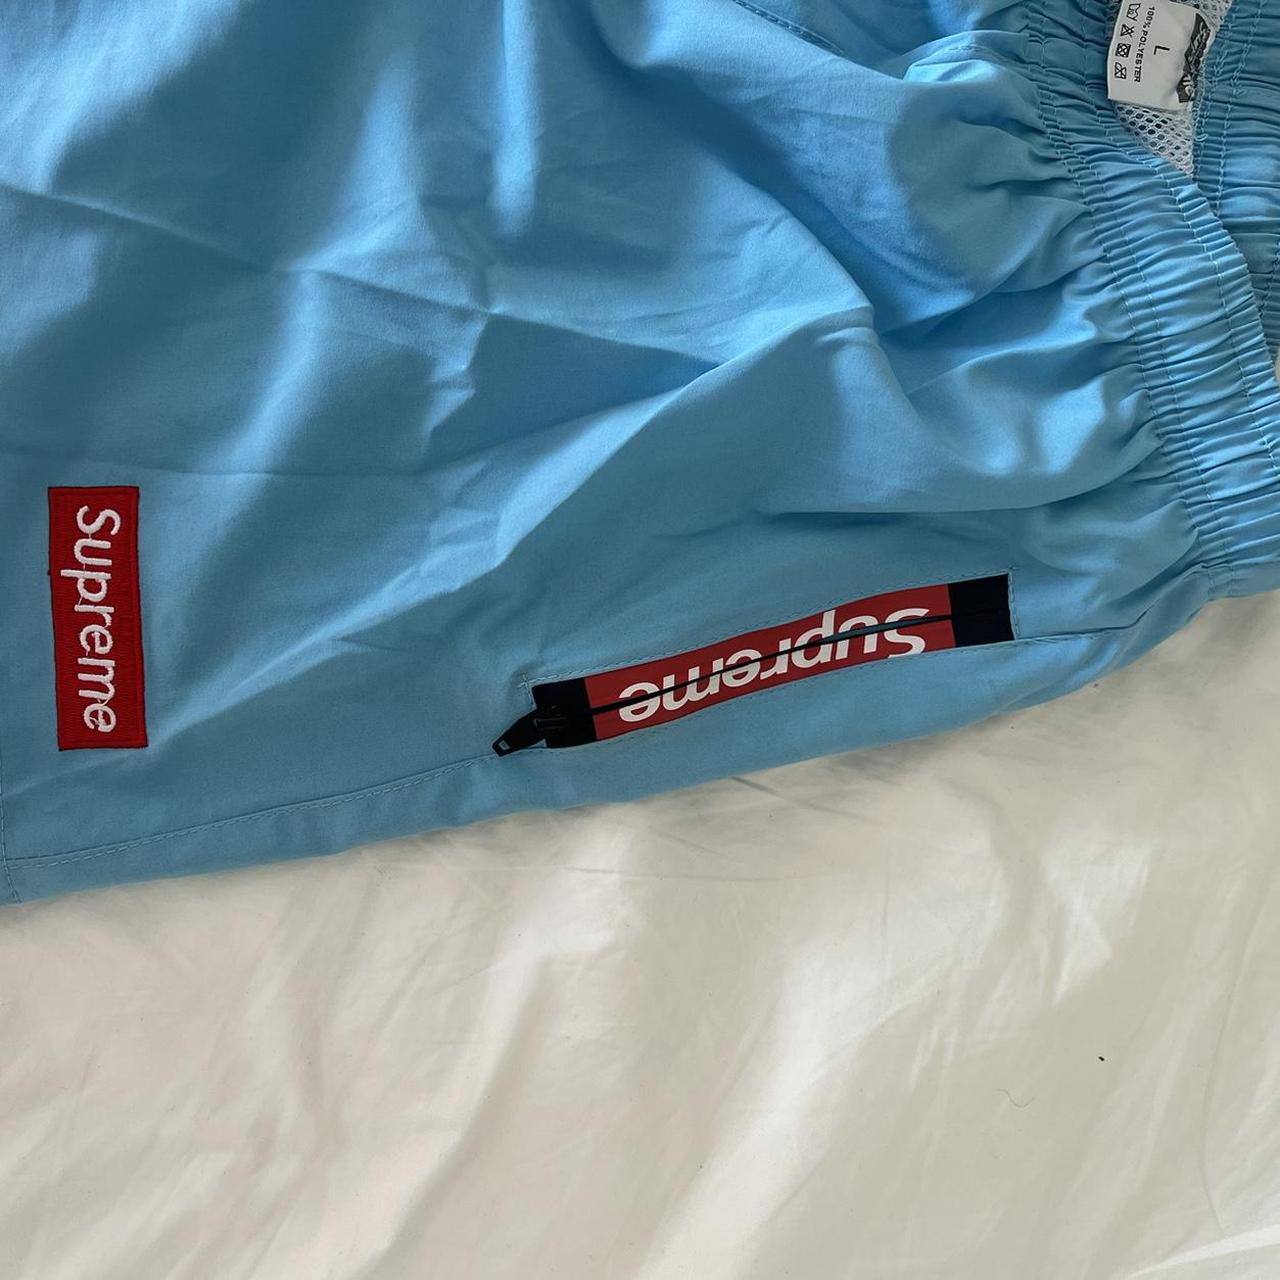 thrifted (bootleg?) supreme shorts perfect for hot...